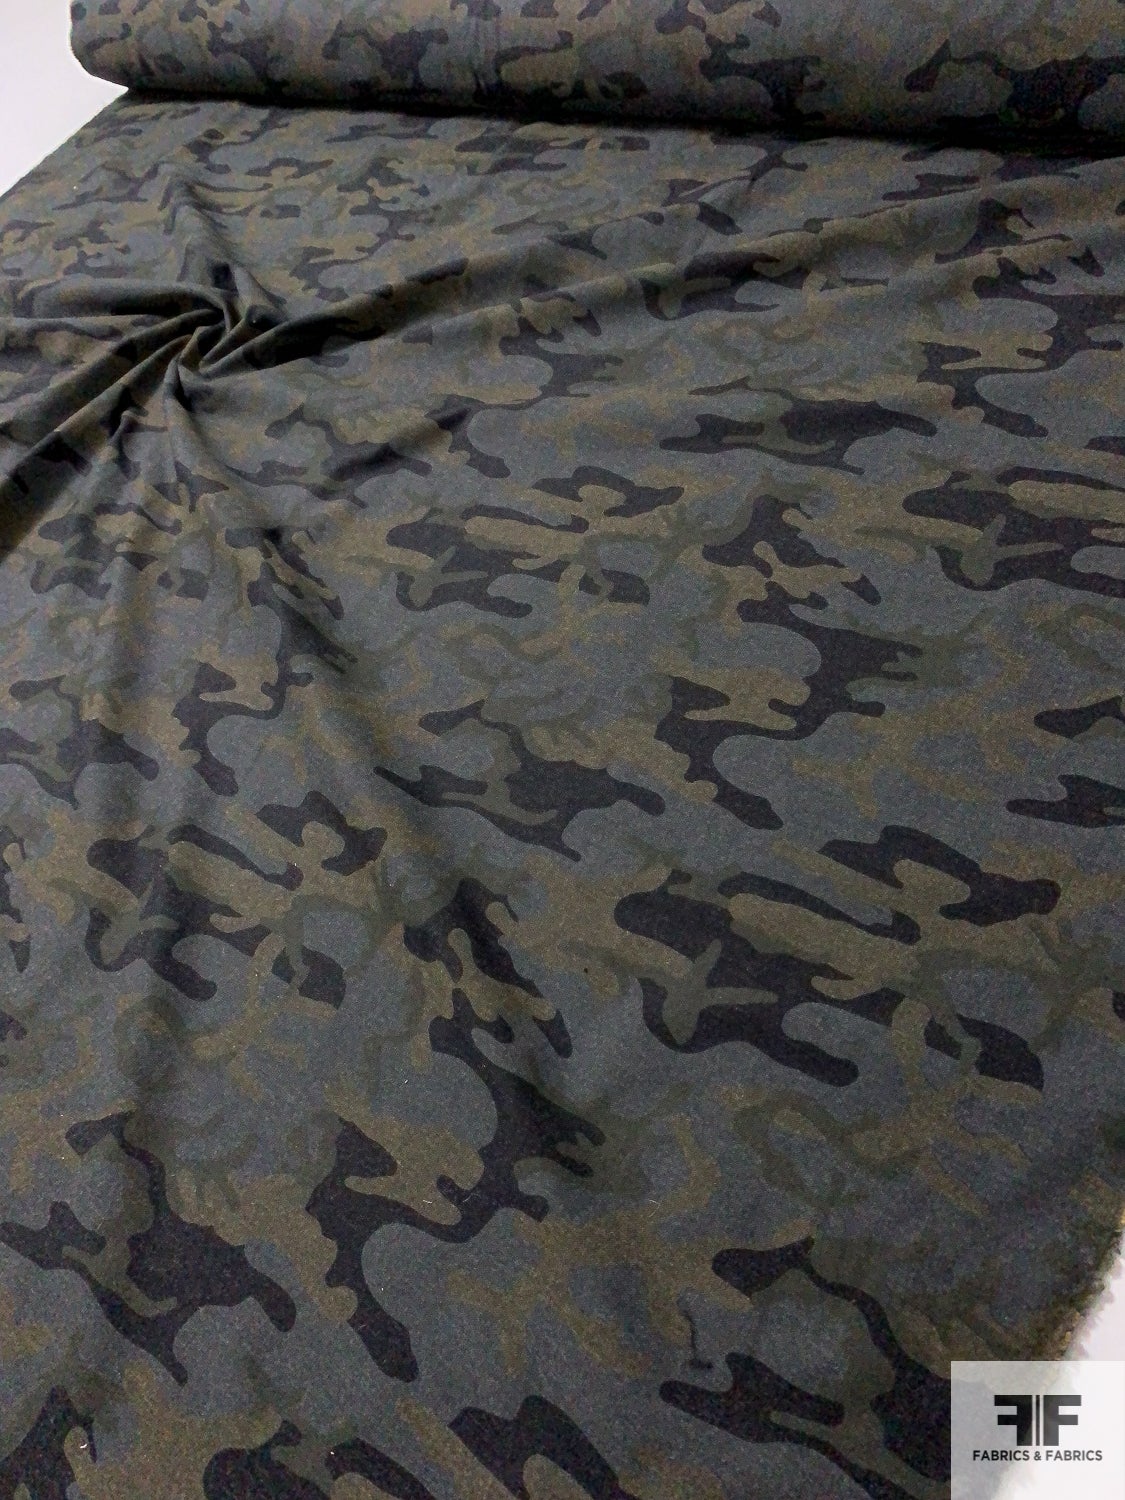 Gray and Black Camo Fabric by the Yard, Black and Gray Camouflage